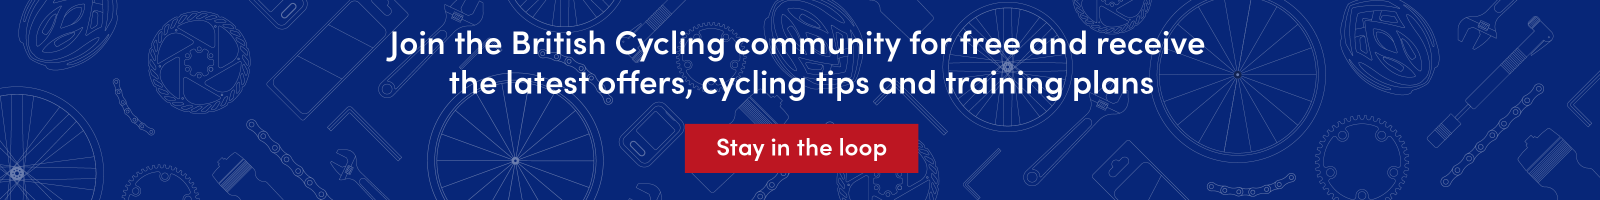 Become a British Cycling member